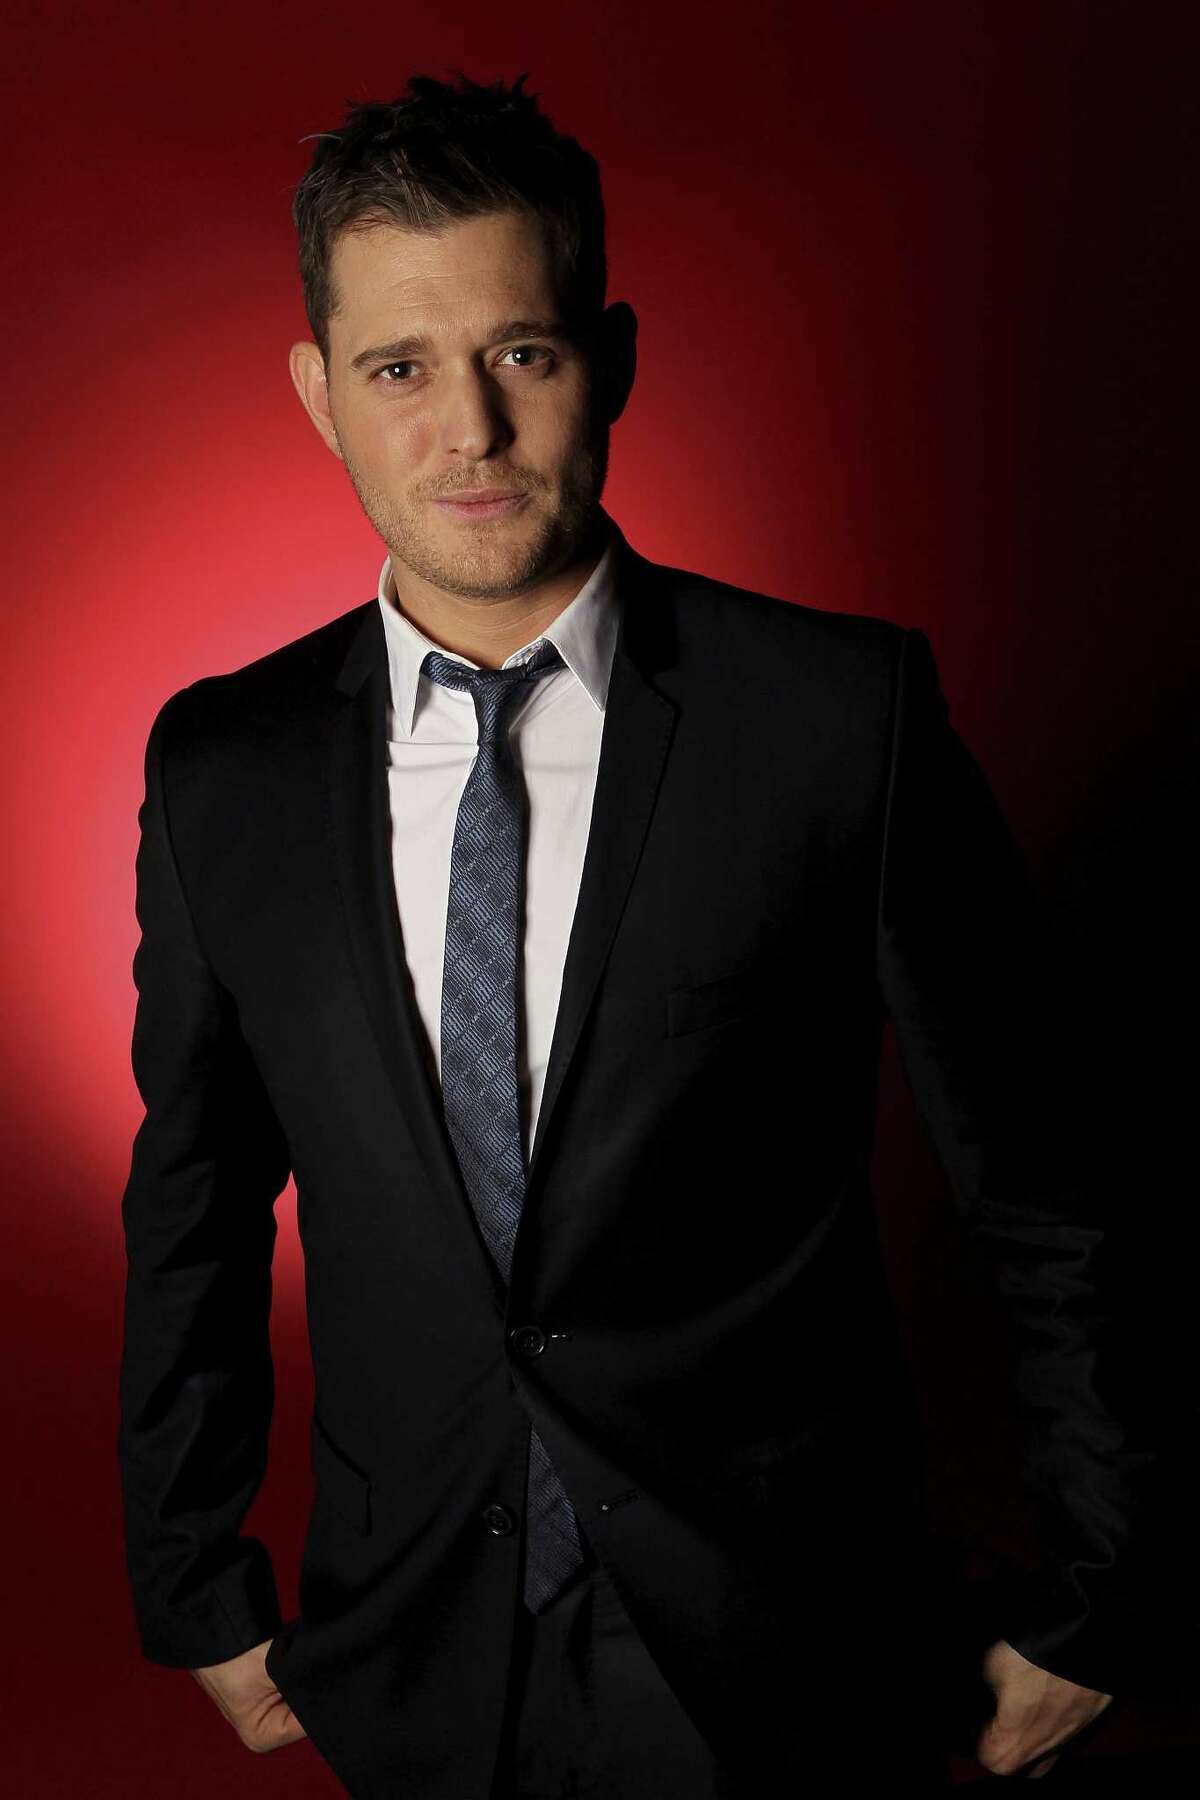 Oct. 19: Michael Bublé to perform at the AT&T Center. Visit www.ticketmaster.com.